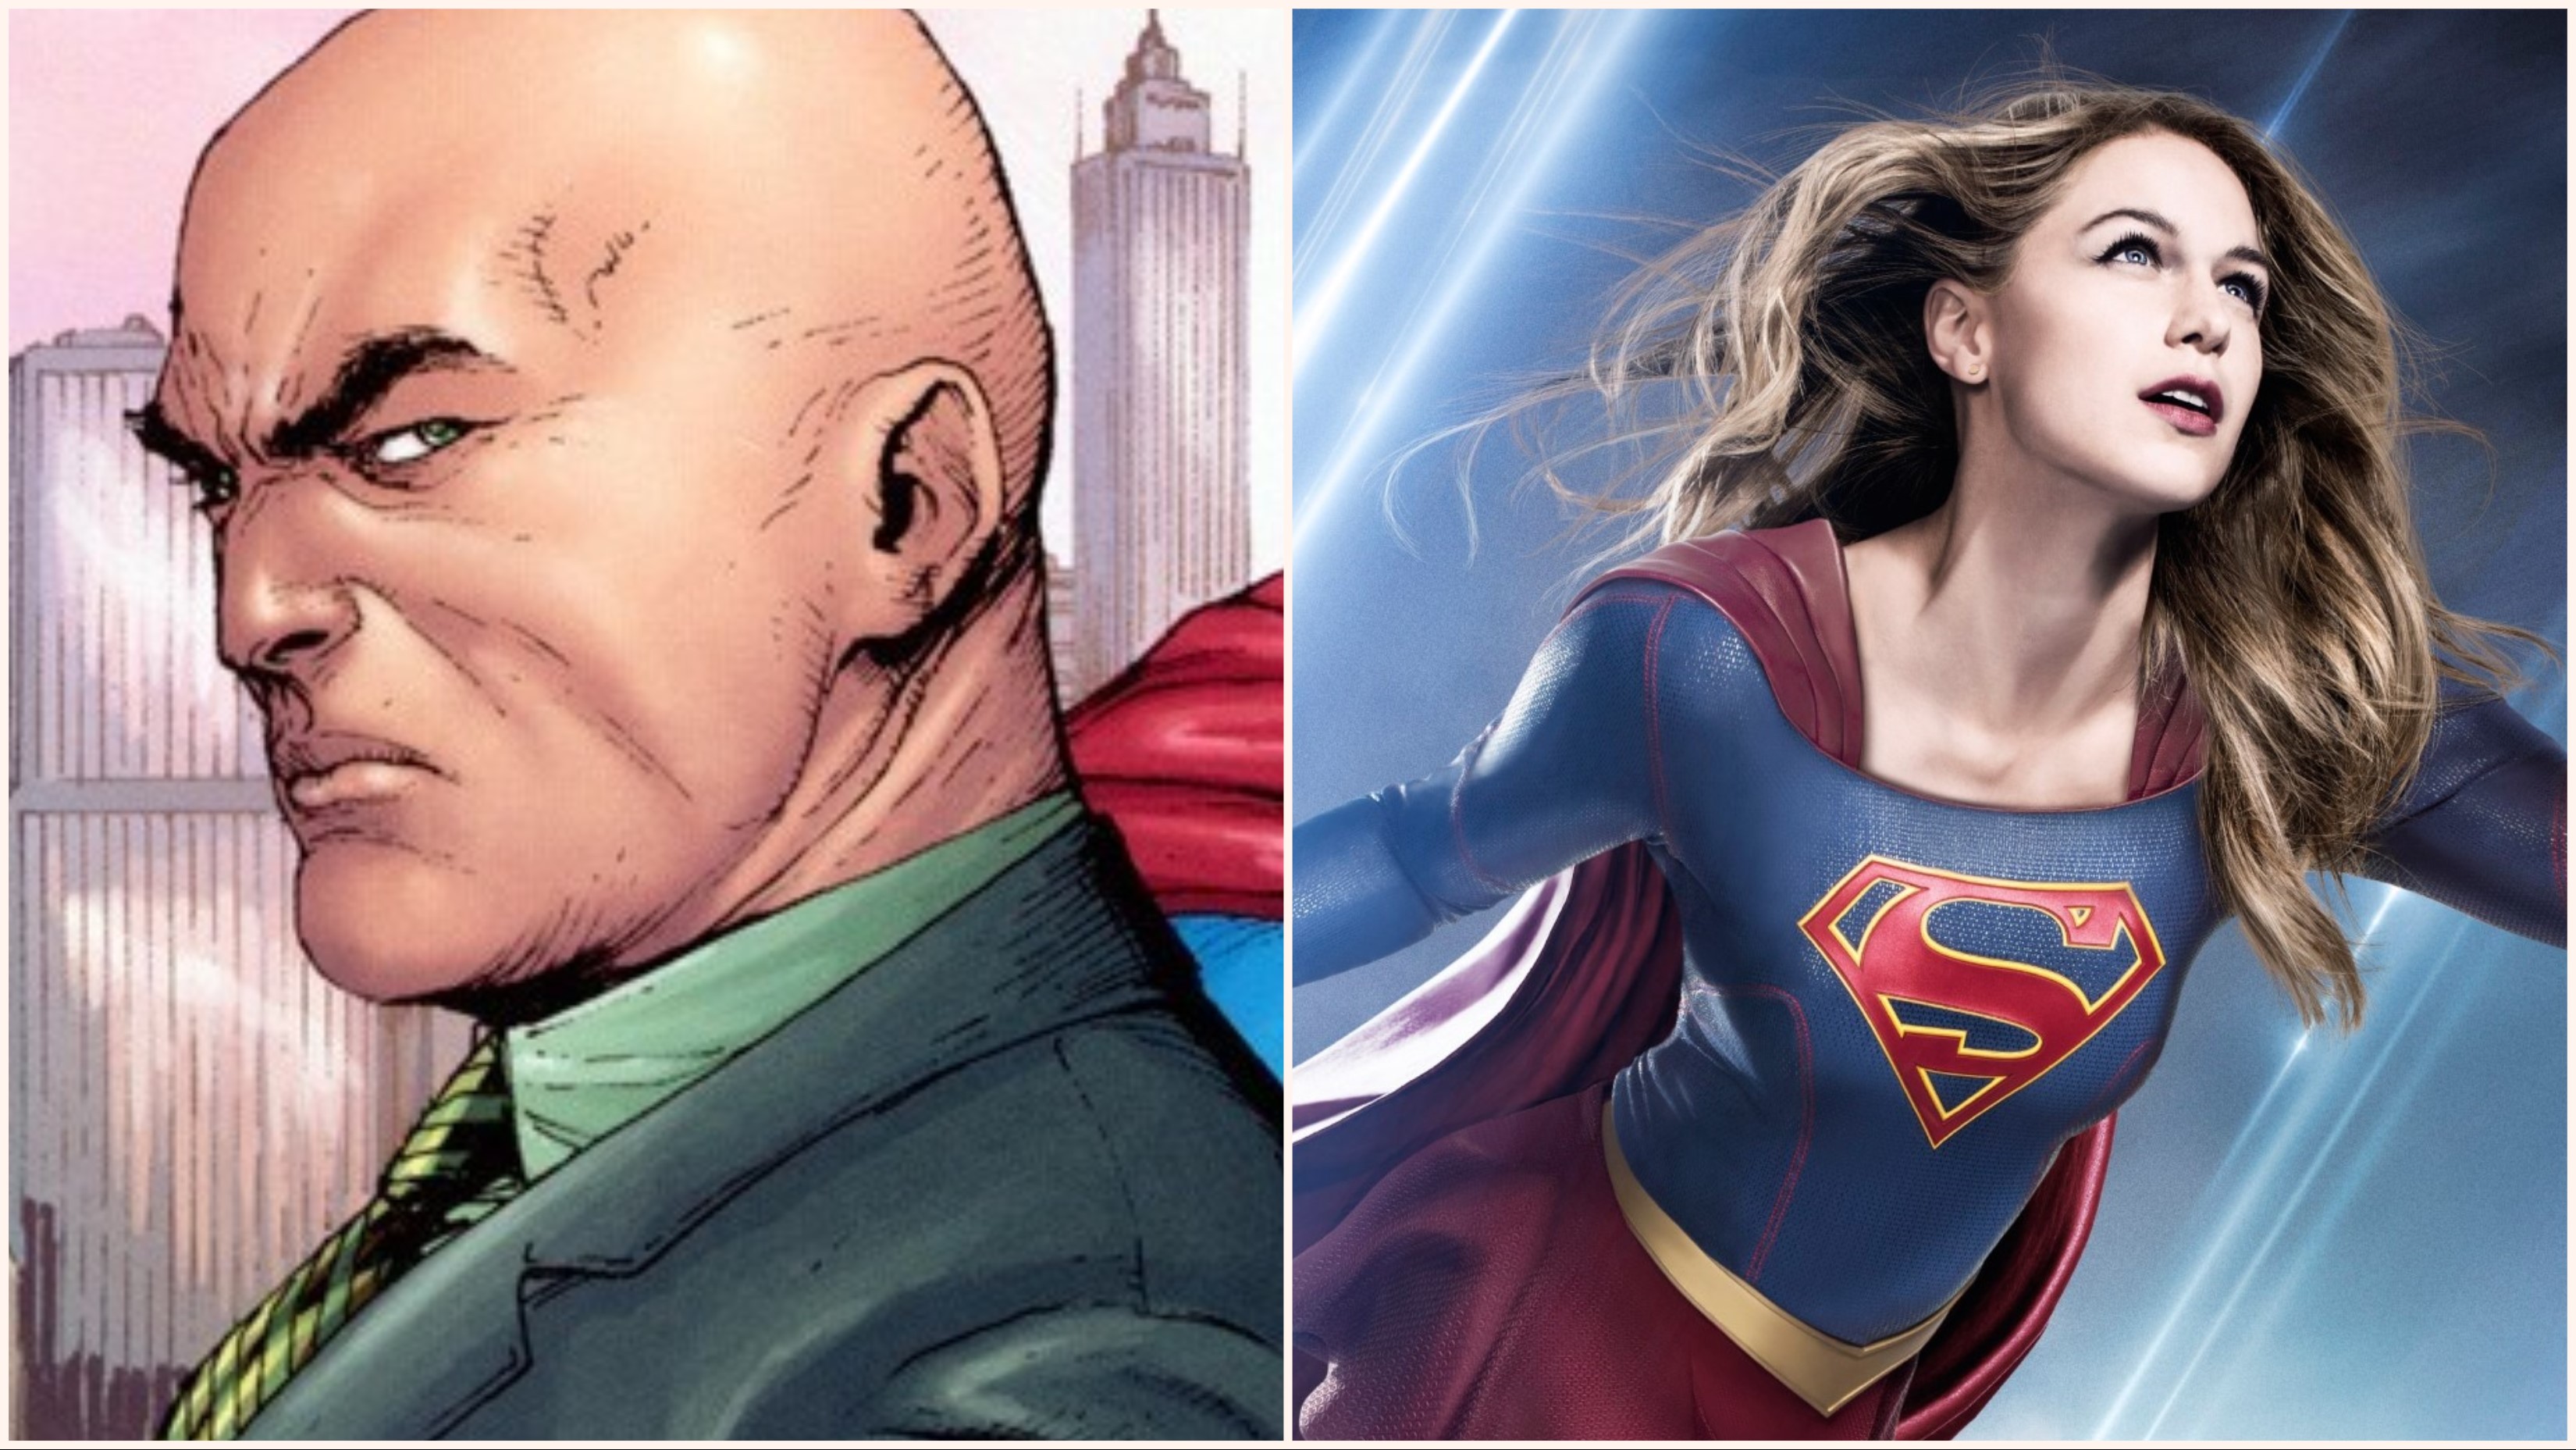 Lex Luthor To Appear On 'Supergirl'